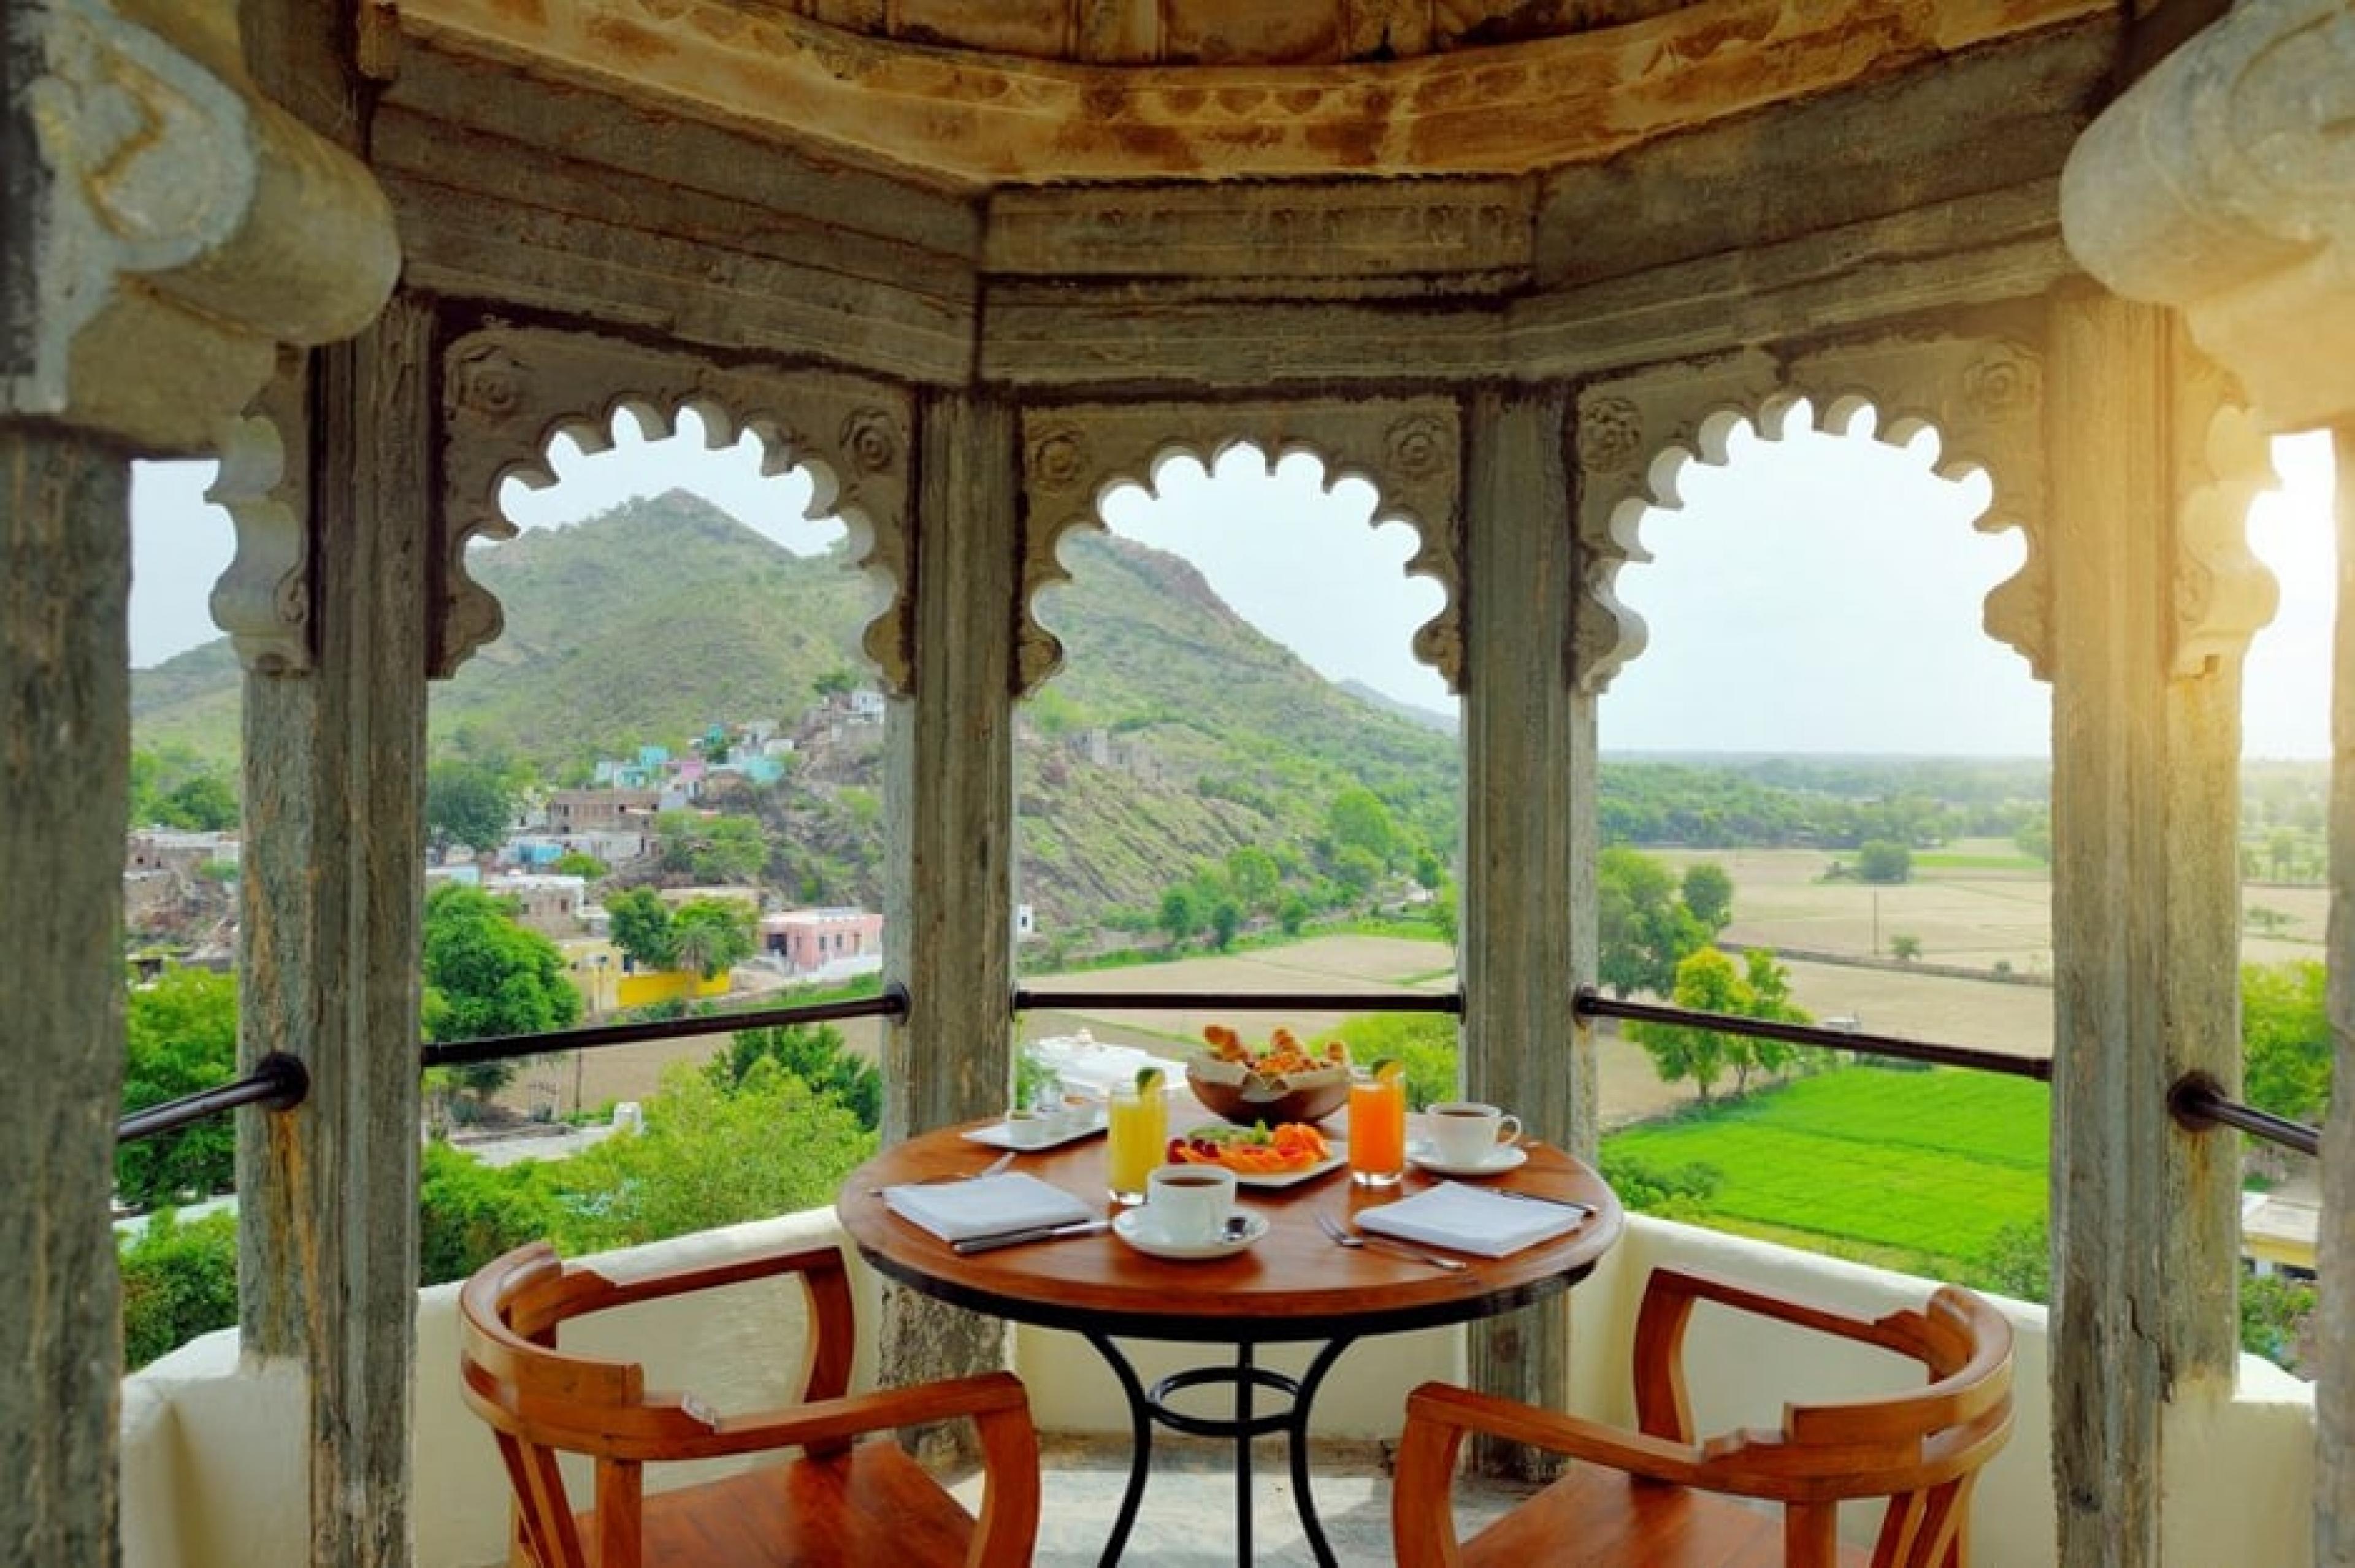 View from Dinning Area - Devi Garh, Udaipur, India